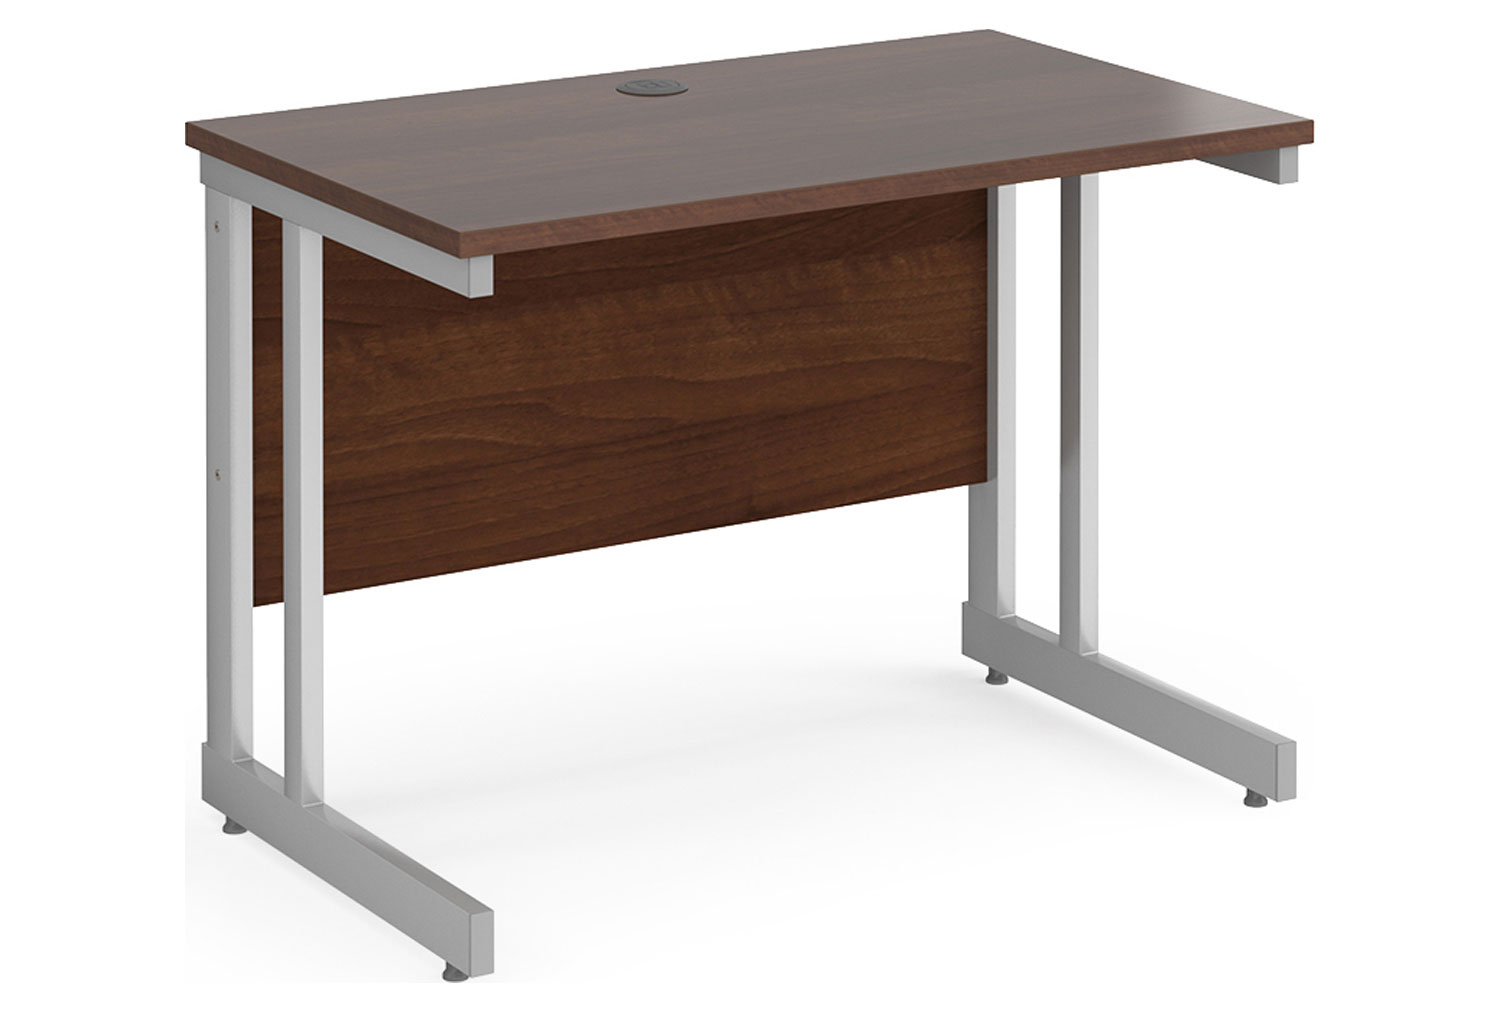 Tully II Narrow Rectangular Office Desk, 100wx60dx73h (cm), Walnut, Express Delivery